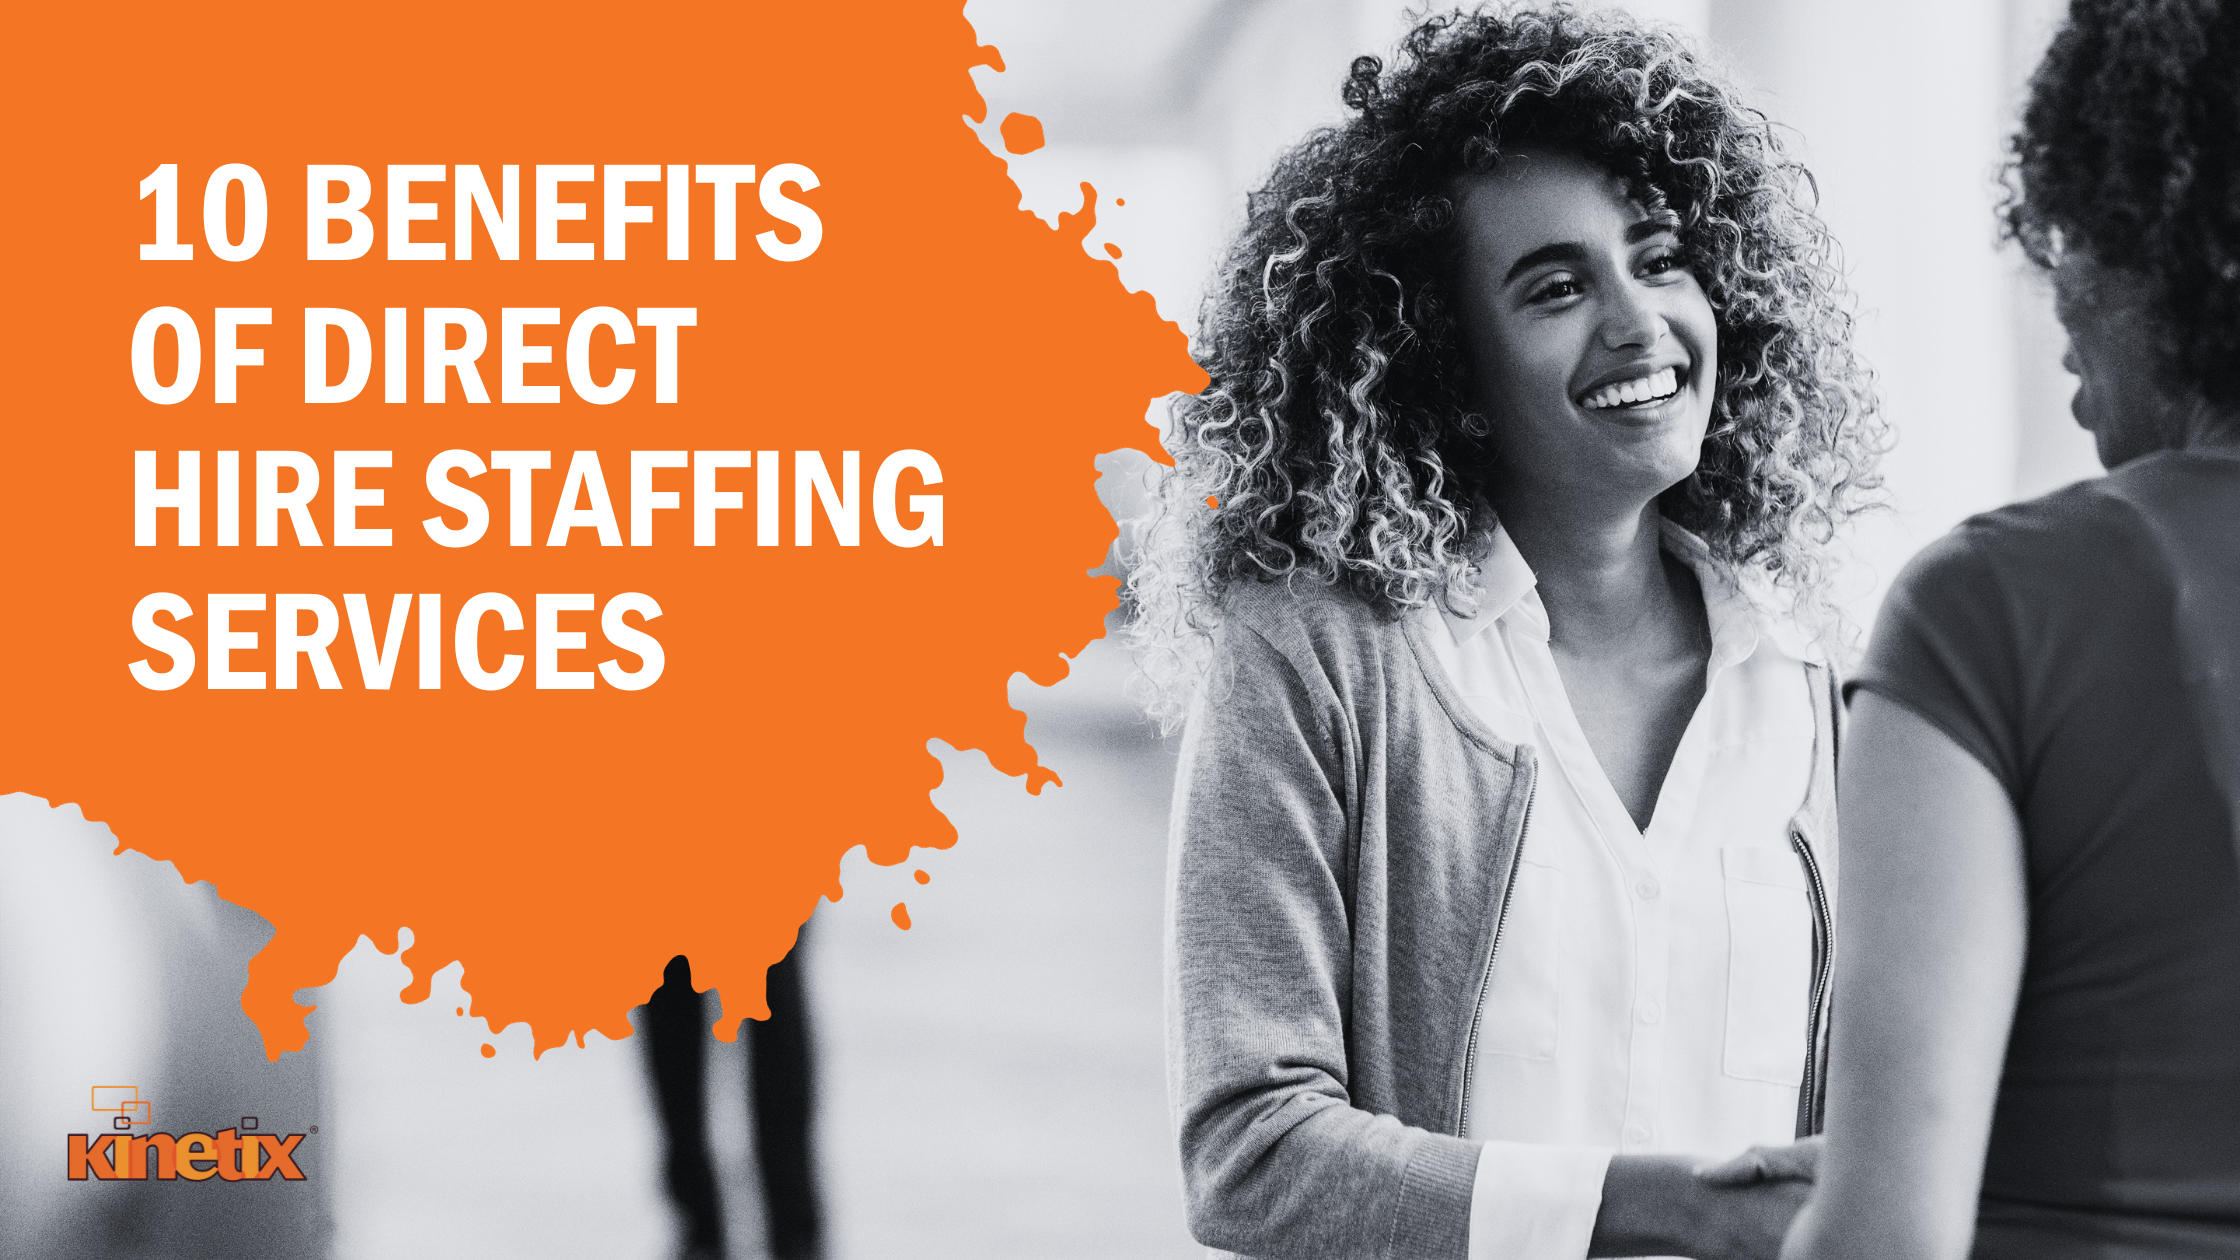 10 Benefits of Direct Hire Staffing Services